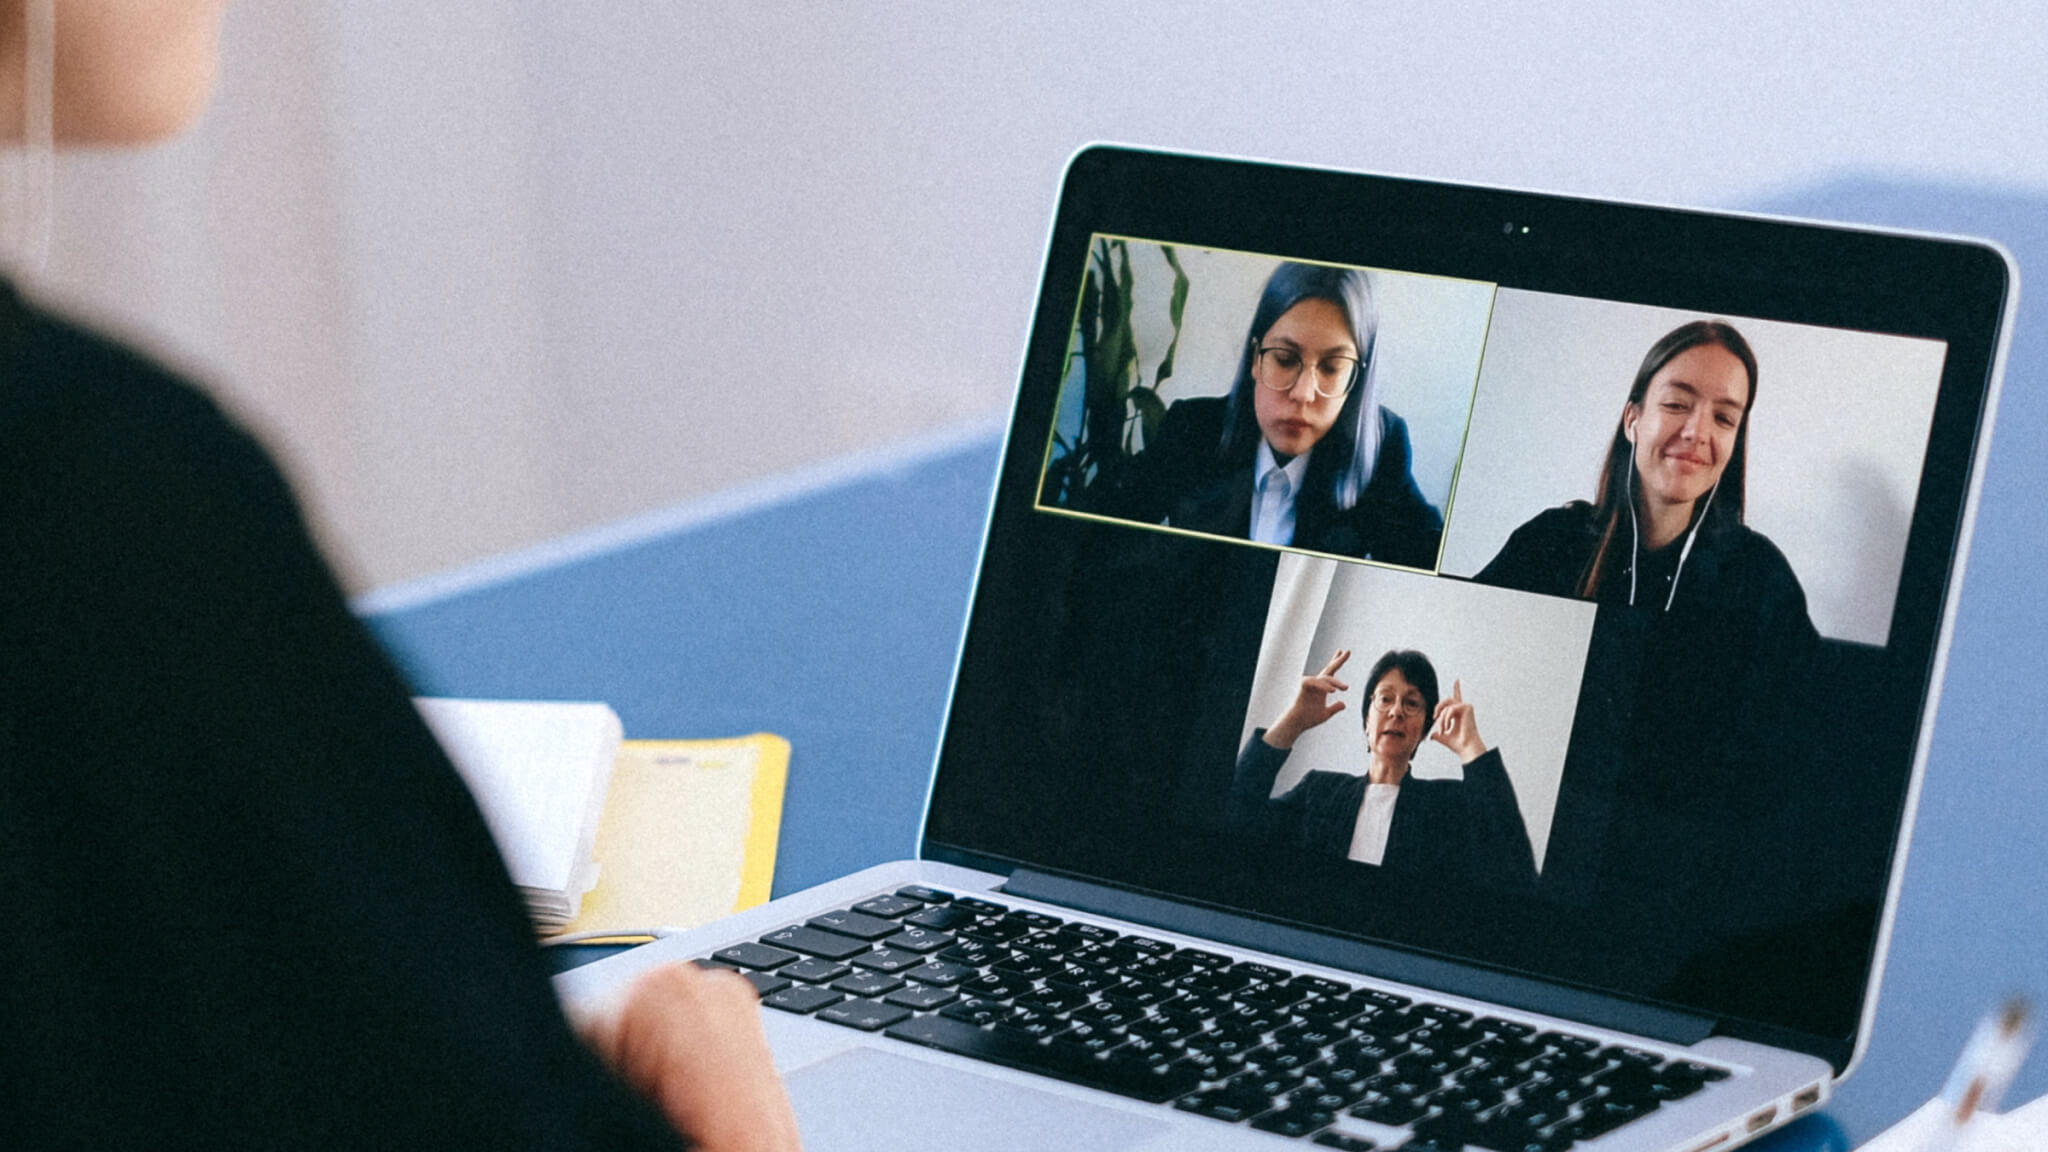 Engaging video call